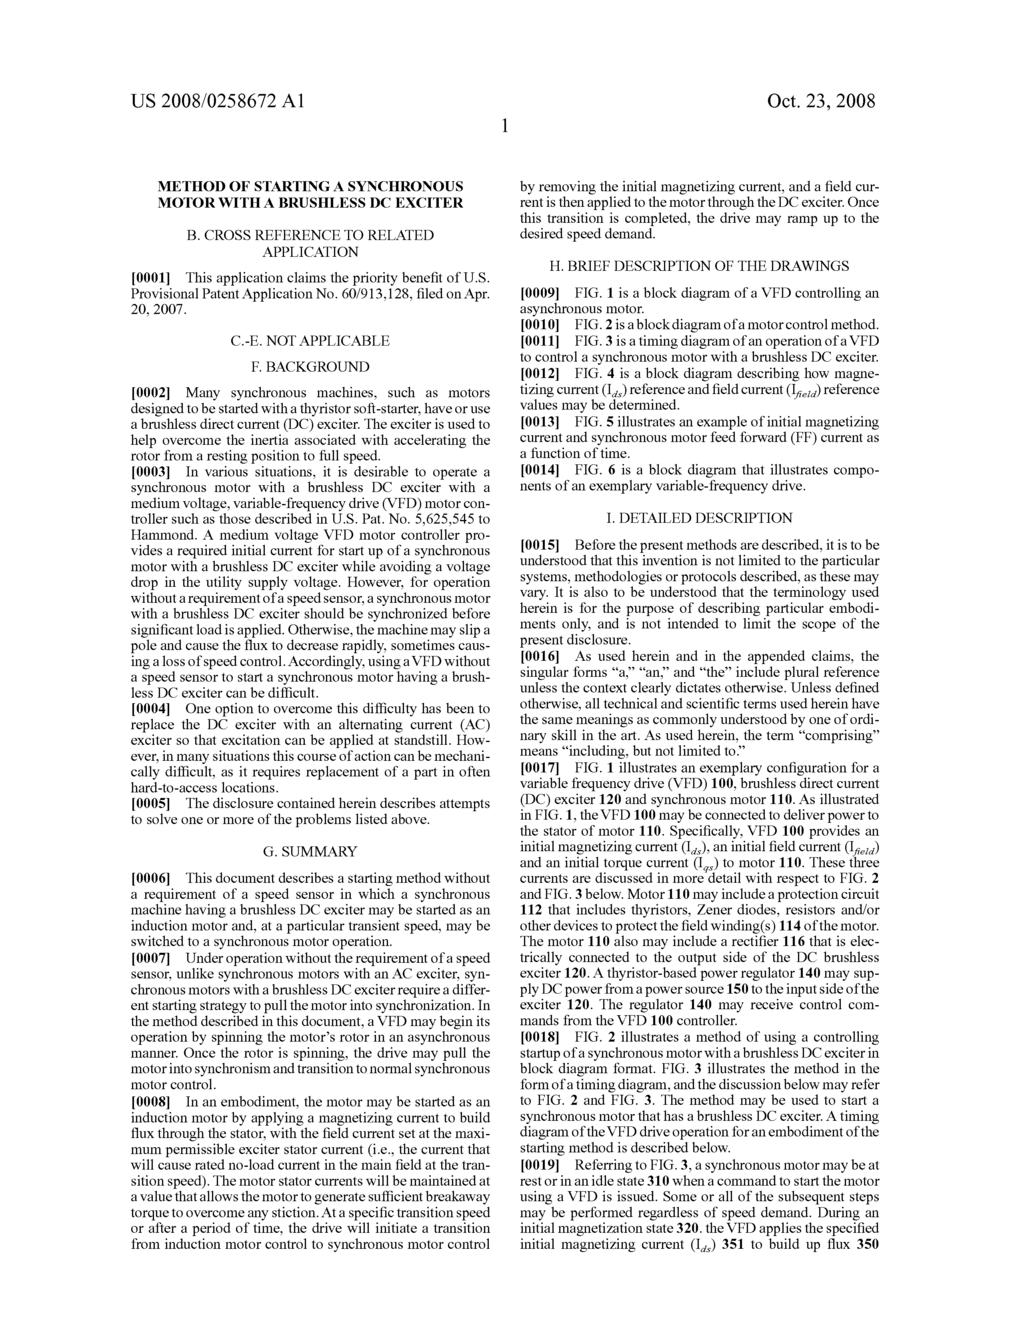 US 2008/0258.672 A1 Oct. 23, 2008 METHOD OF STARTING ASYNCHRONOUS MOTOR WITH ABRUSHLESS DC EXCITER B. CROSS REFERENCE TO RELATED APPLICATION 0001. This application claims the priority benefit of U.S. Provisional Patent Application No.